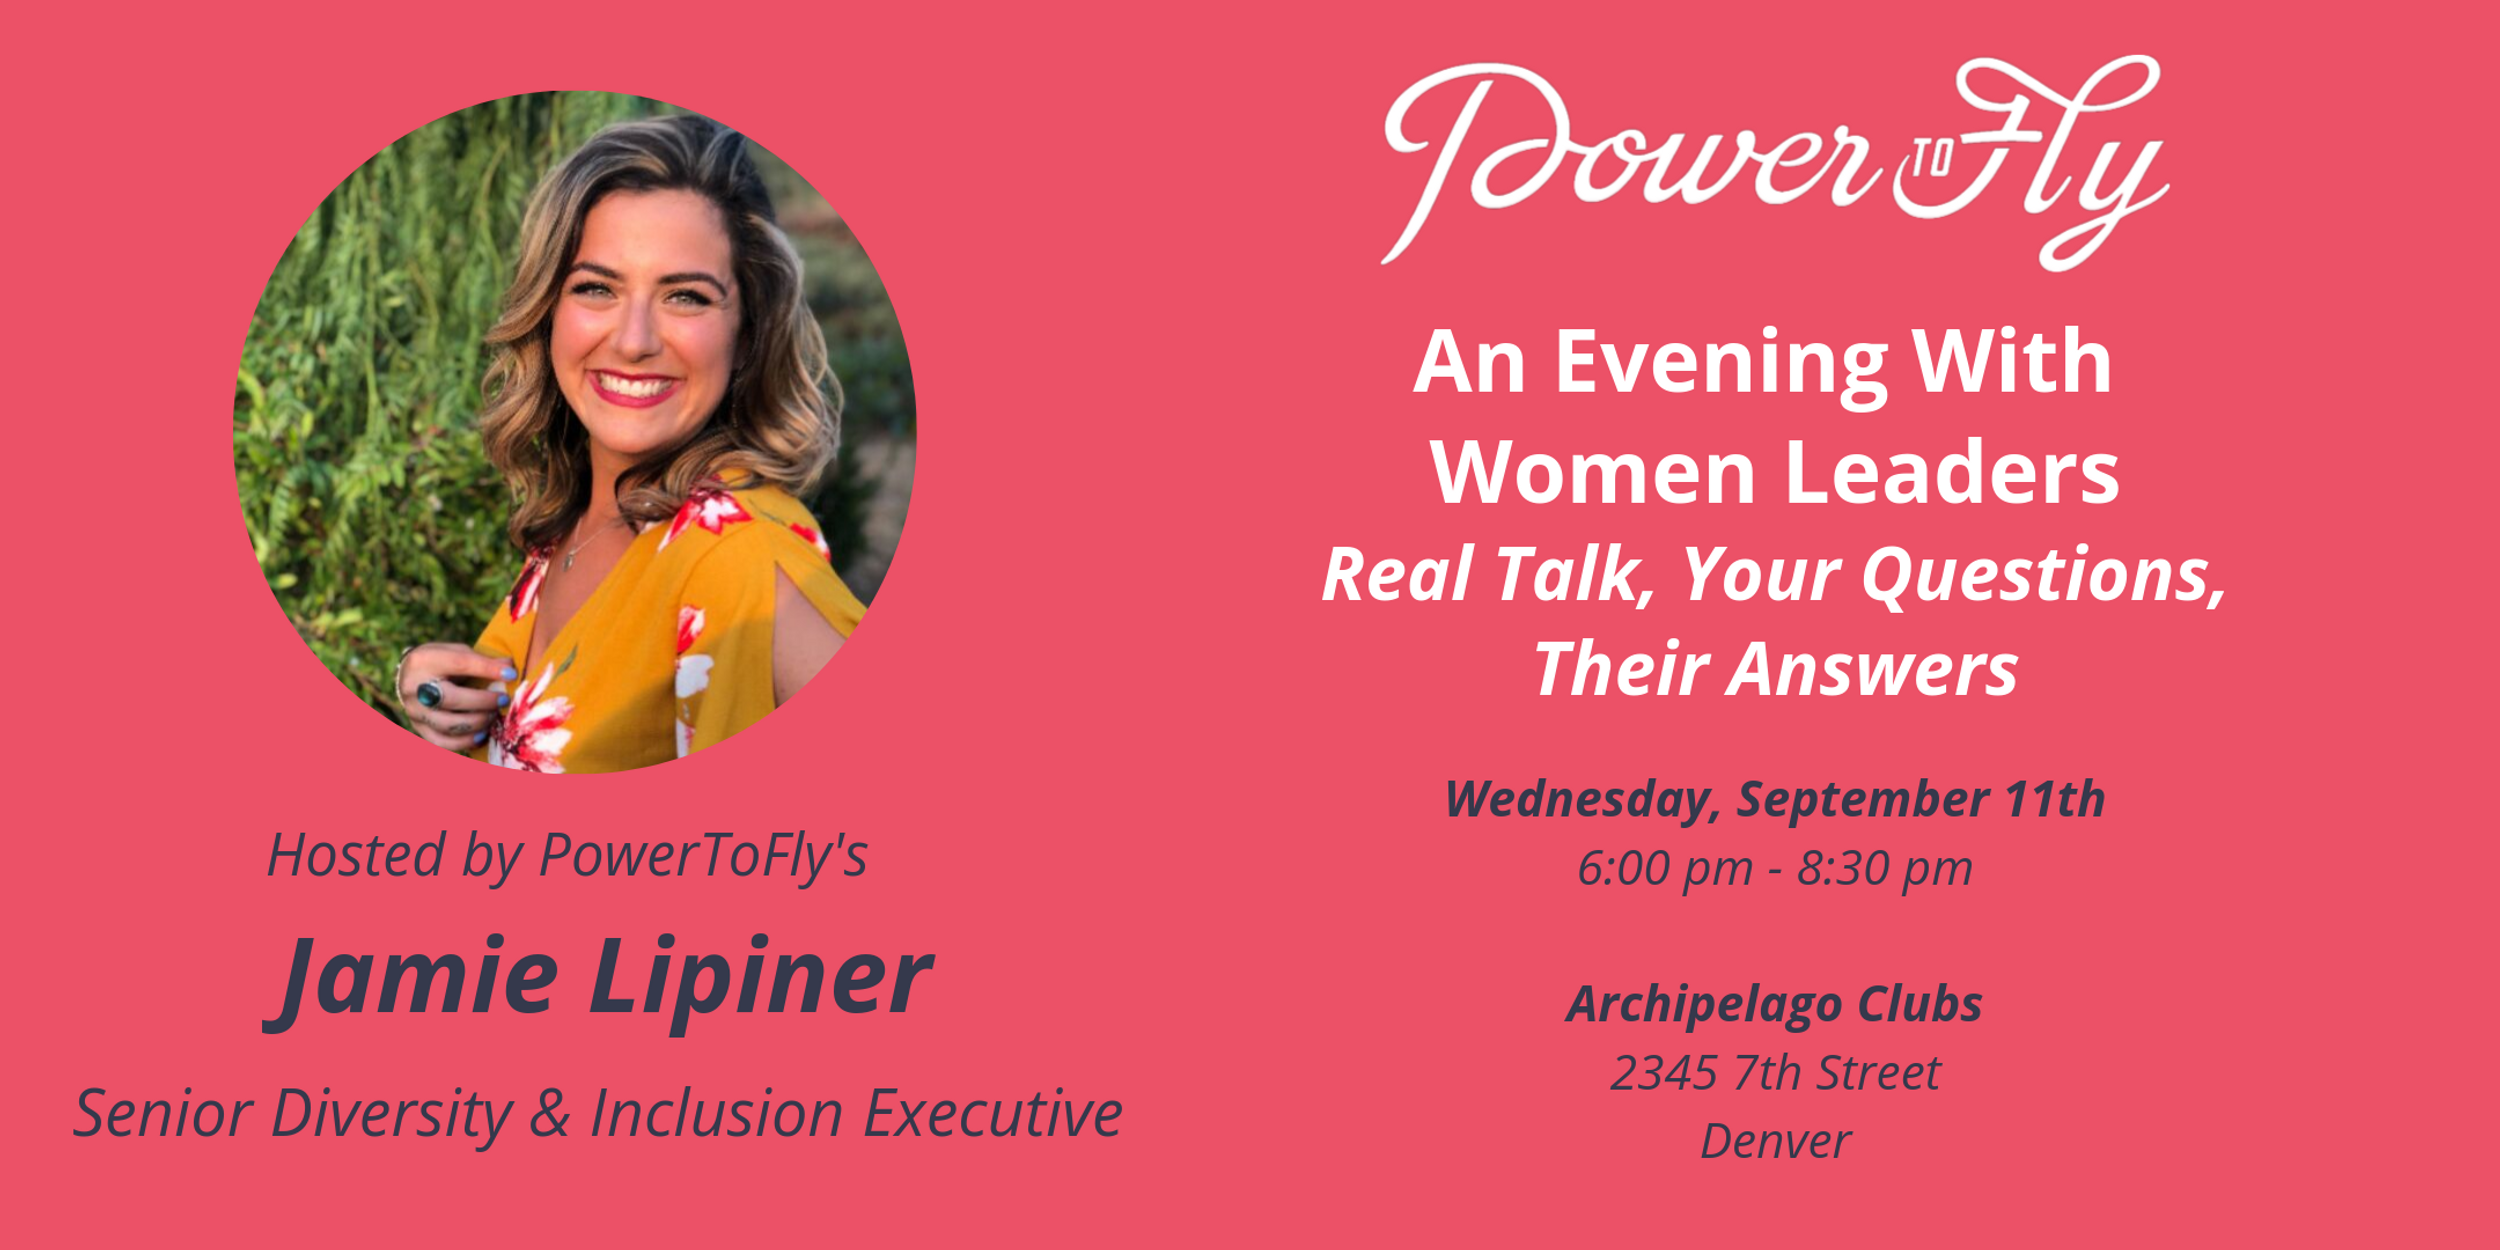 An Evening With Women Leaders - Real Talk, Real Questions, Real Answers